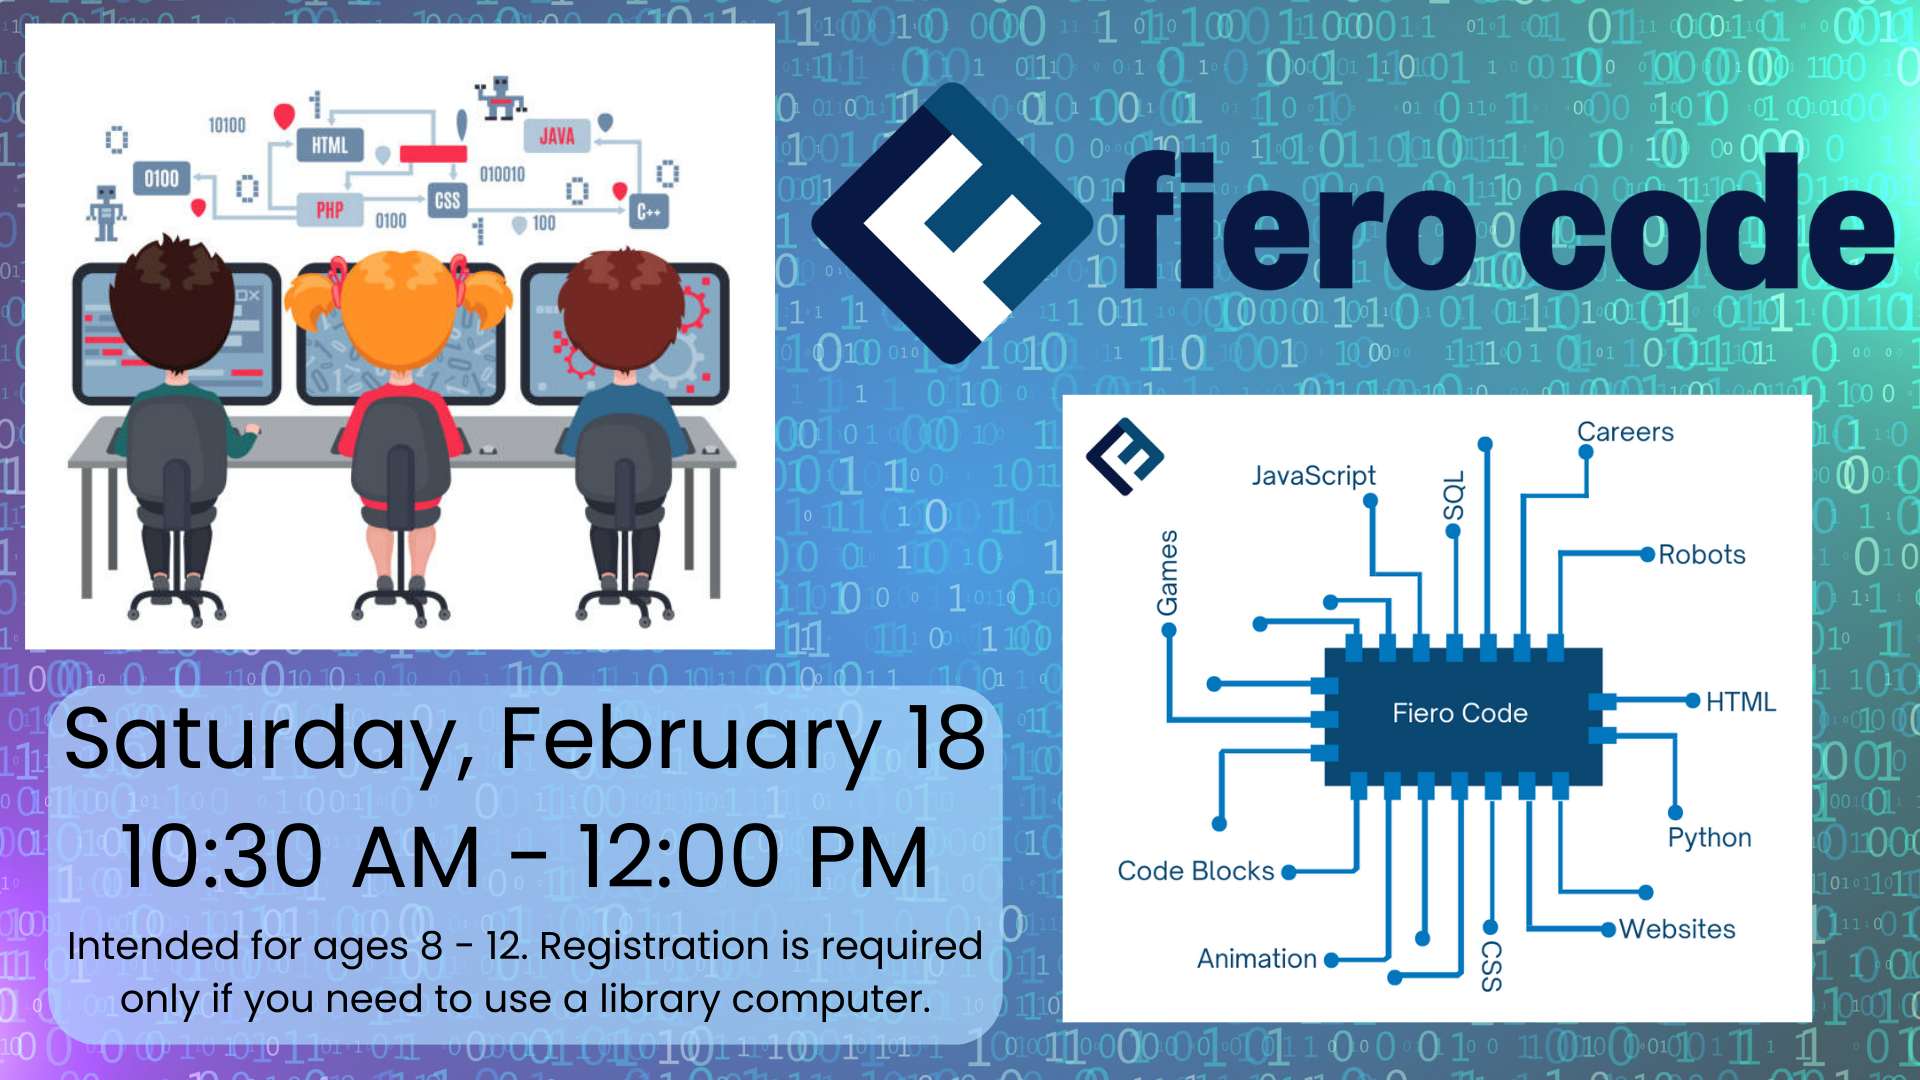 Fiero Code Club Saturday February 18 at 10:30 AM to 12:00 PM for ages 8 to 12